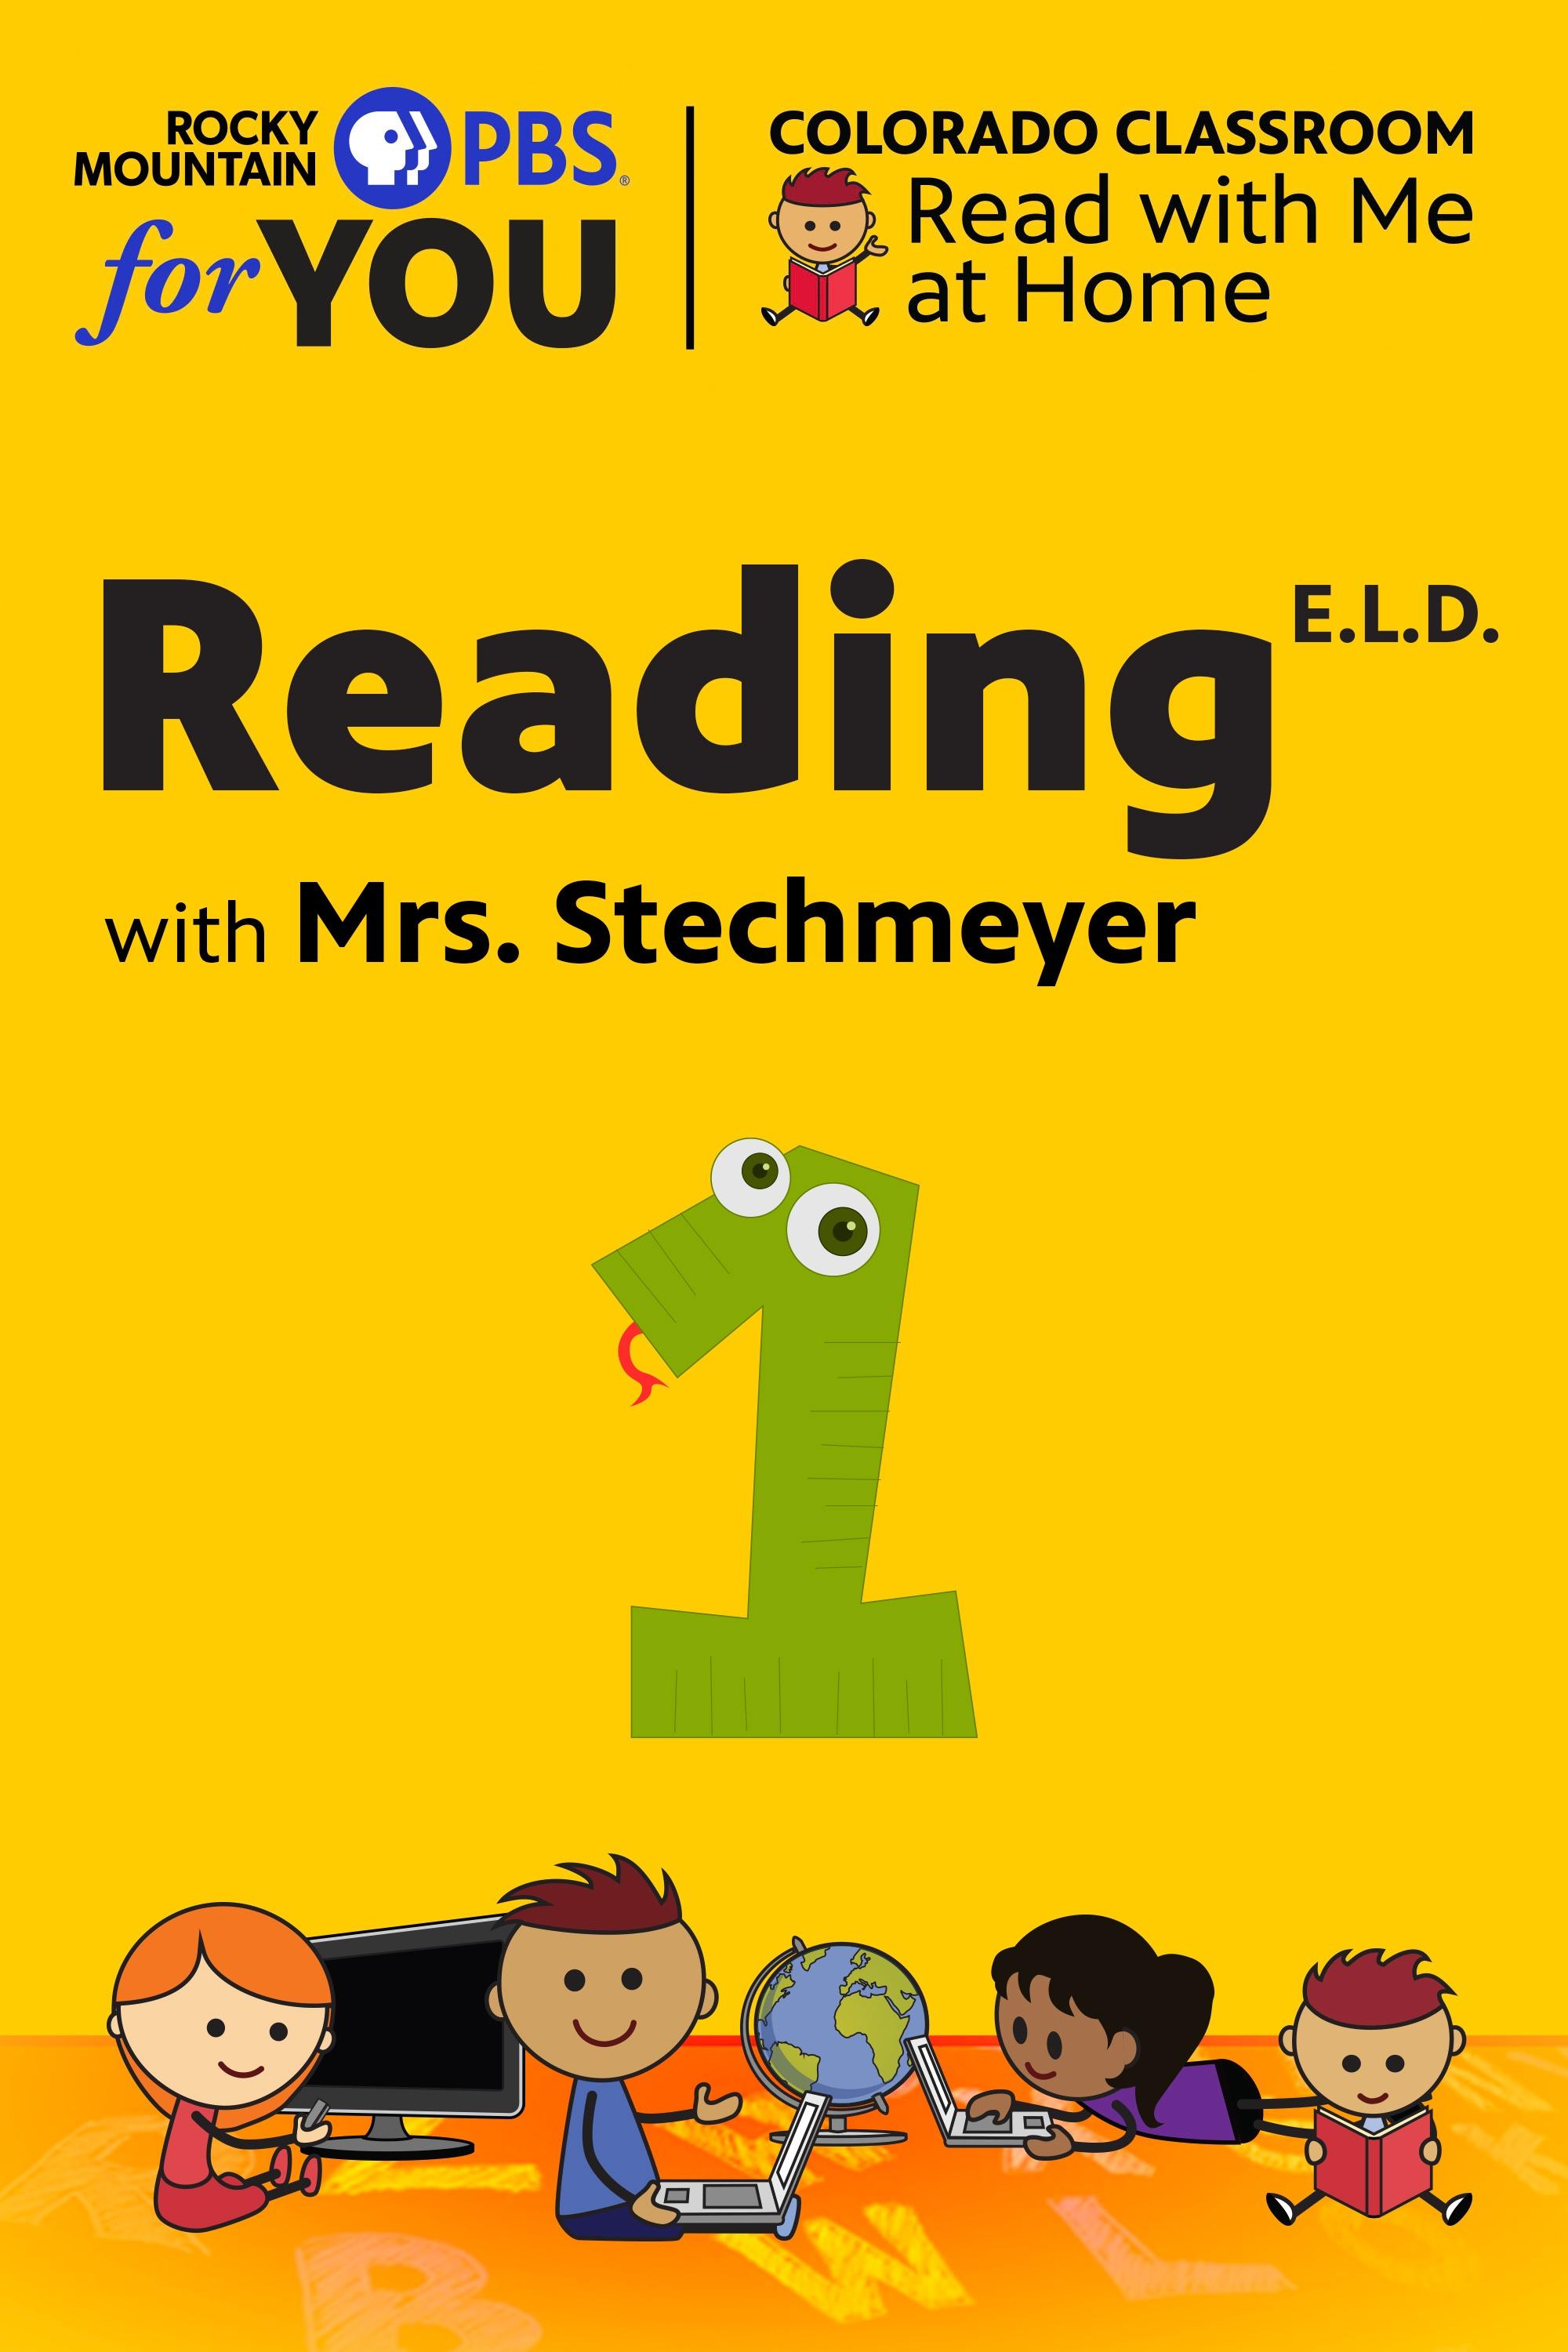 Colorado Classroom: Reading with Mrs. Stechmeyer (E.L.D.) show's poster